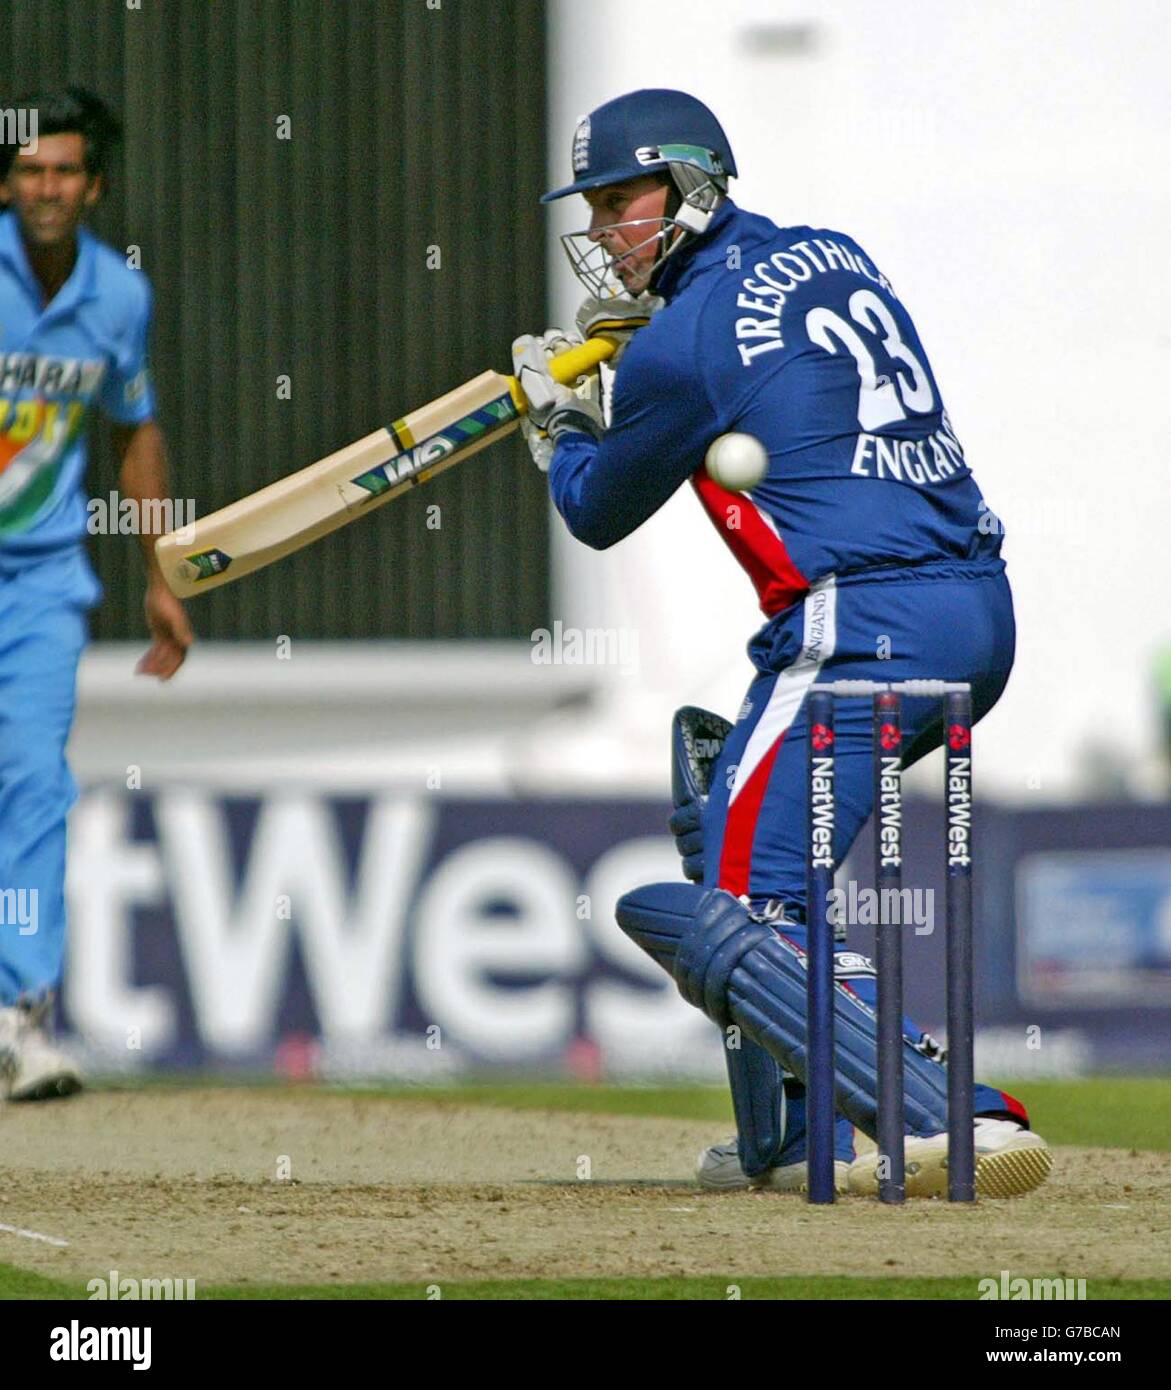 England's Marcus Trescothic swings his bat during the second Natwest Challenge one day international at The Oval, London. He reached 27 before being caught off Harbhajan Singh. Stock Photo